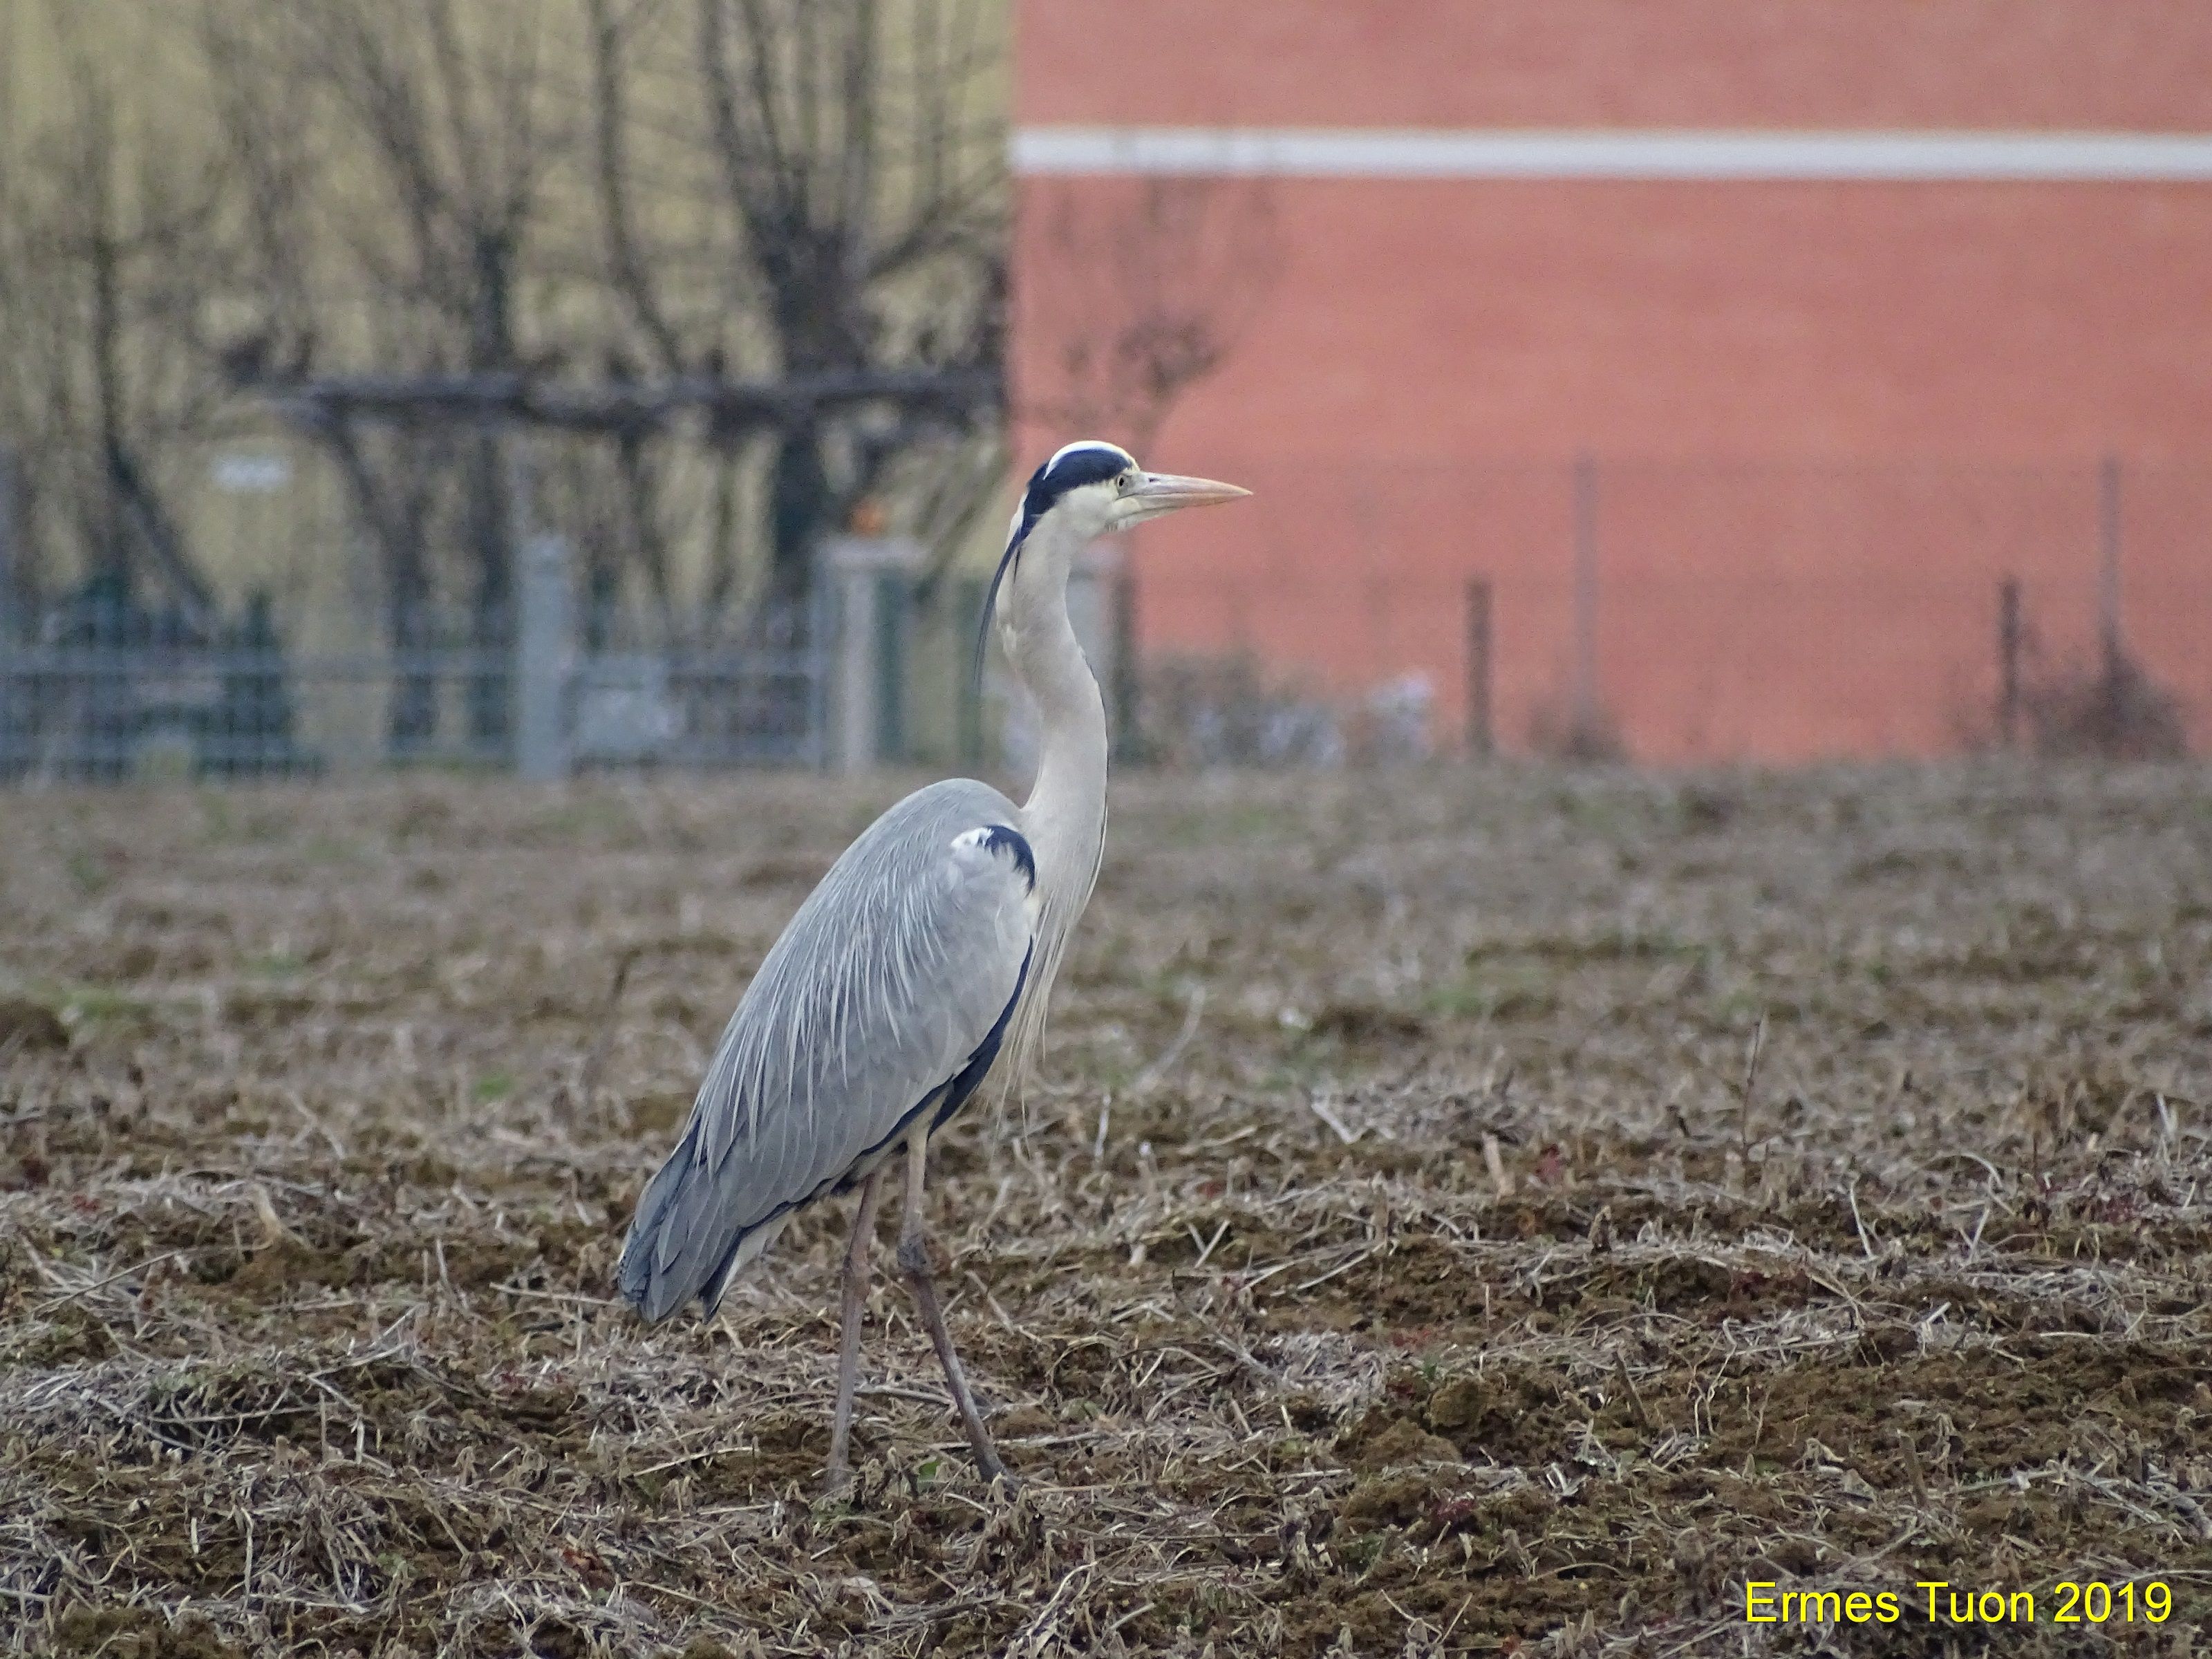 Caption - A Gray Heron on the field on January First -  Local Guide @ermest